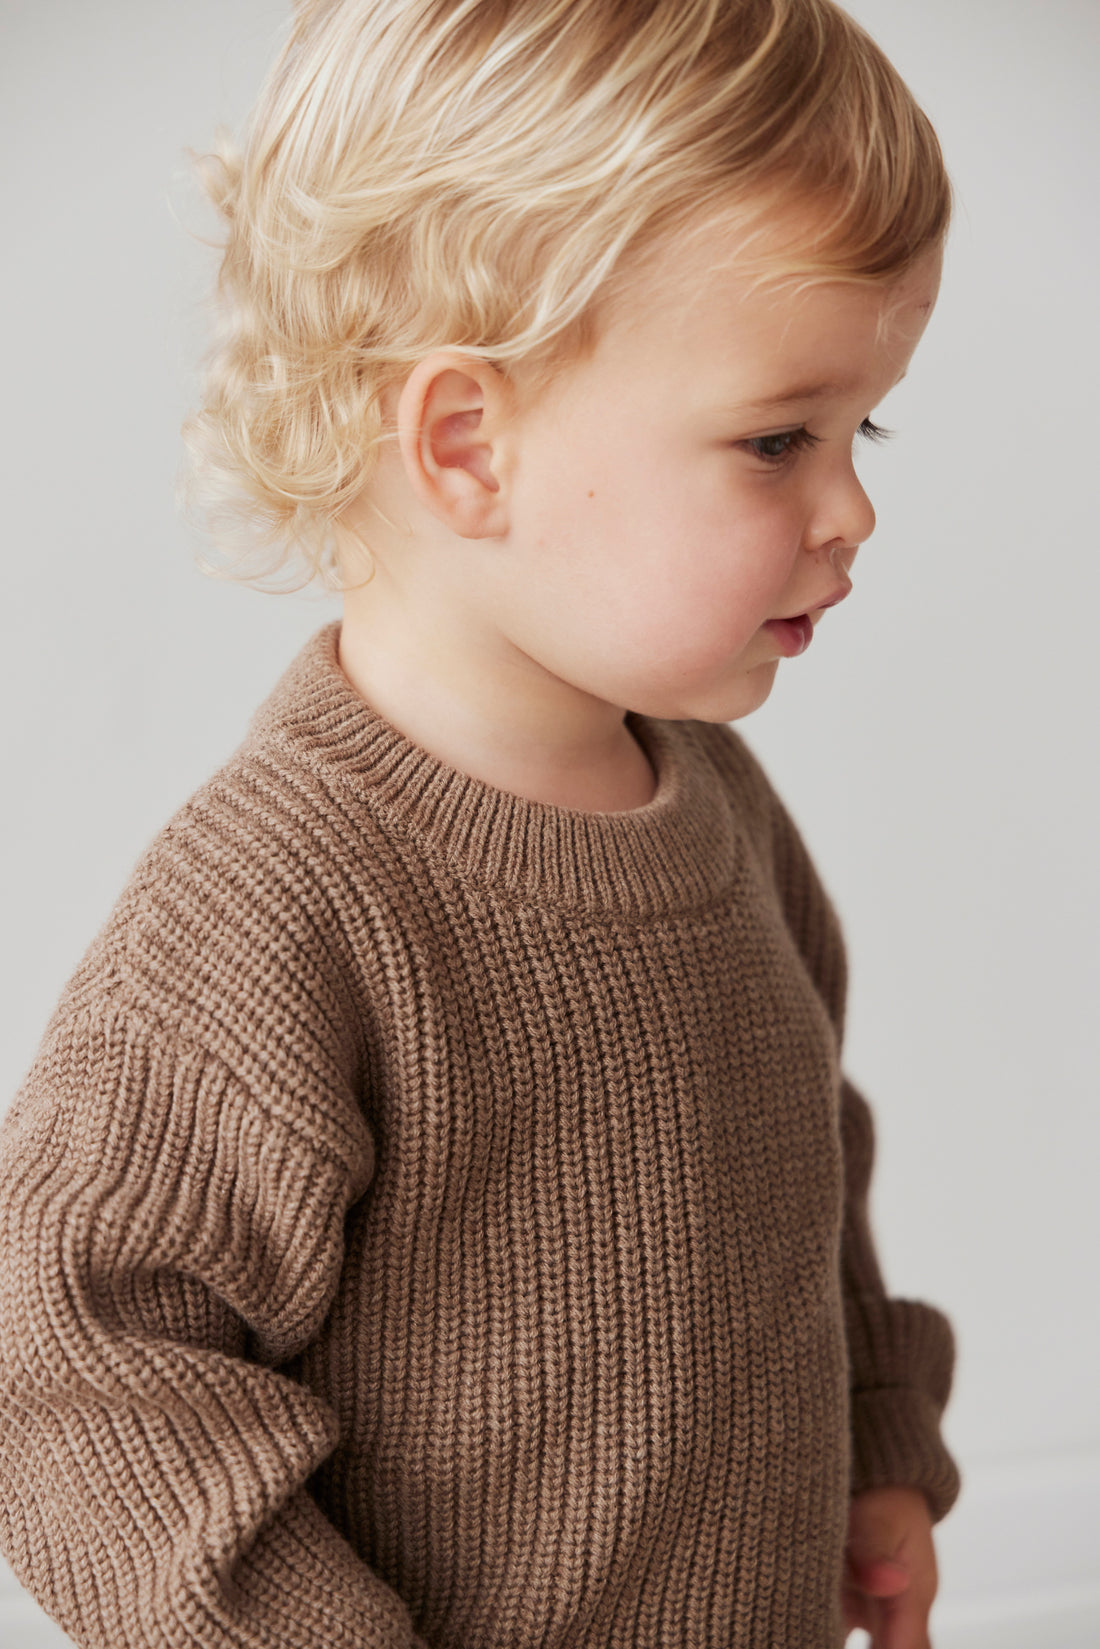 Leon Jumper - Mouse Marle Childrens Jumper from Jamie Kay NZ